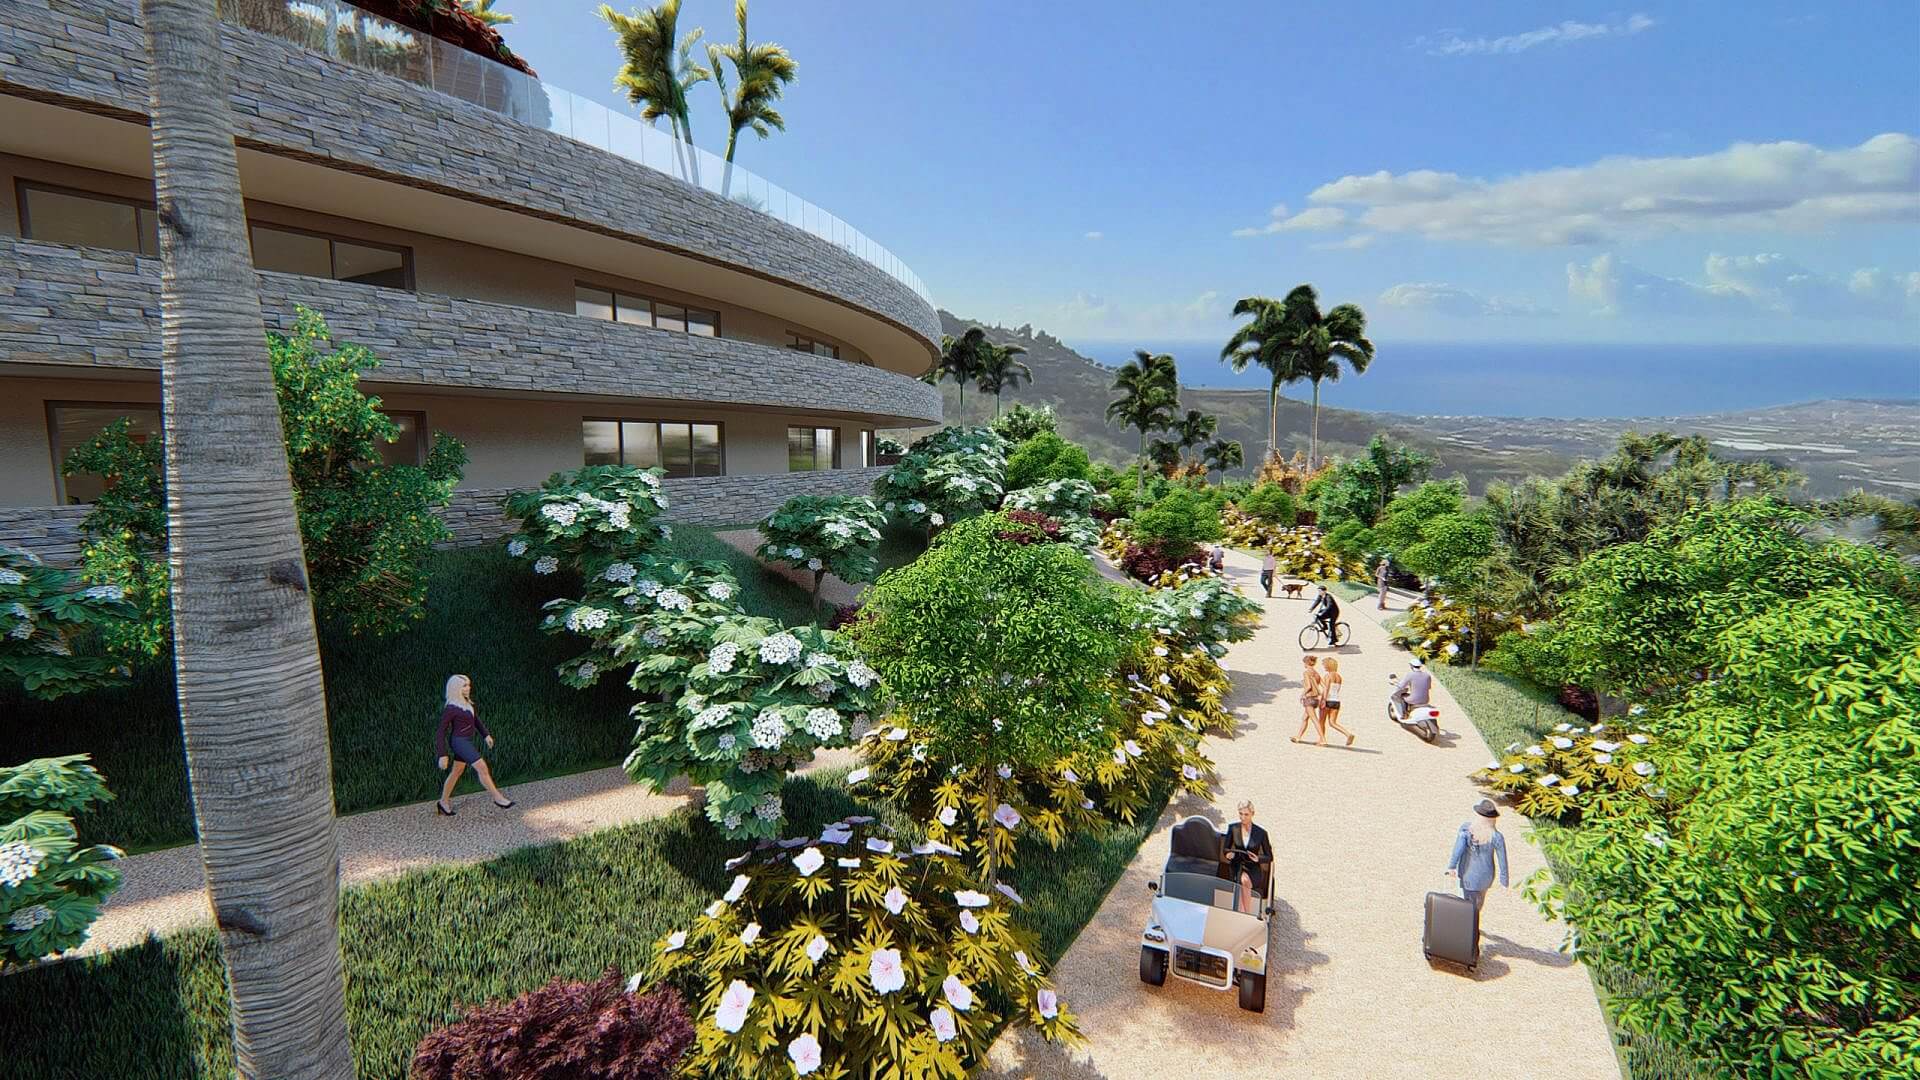 INVESTMENT PROJECT to build an Active Lifestyle Seaview Resort.